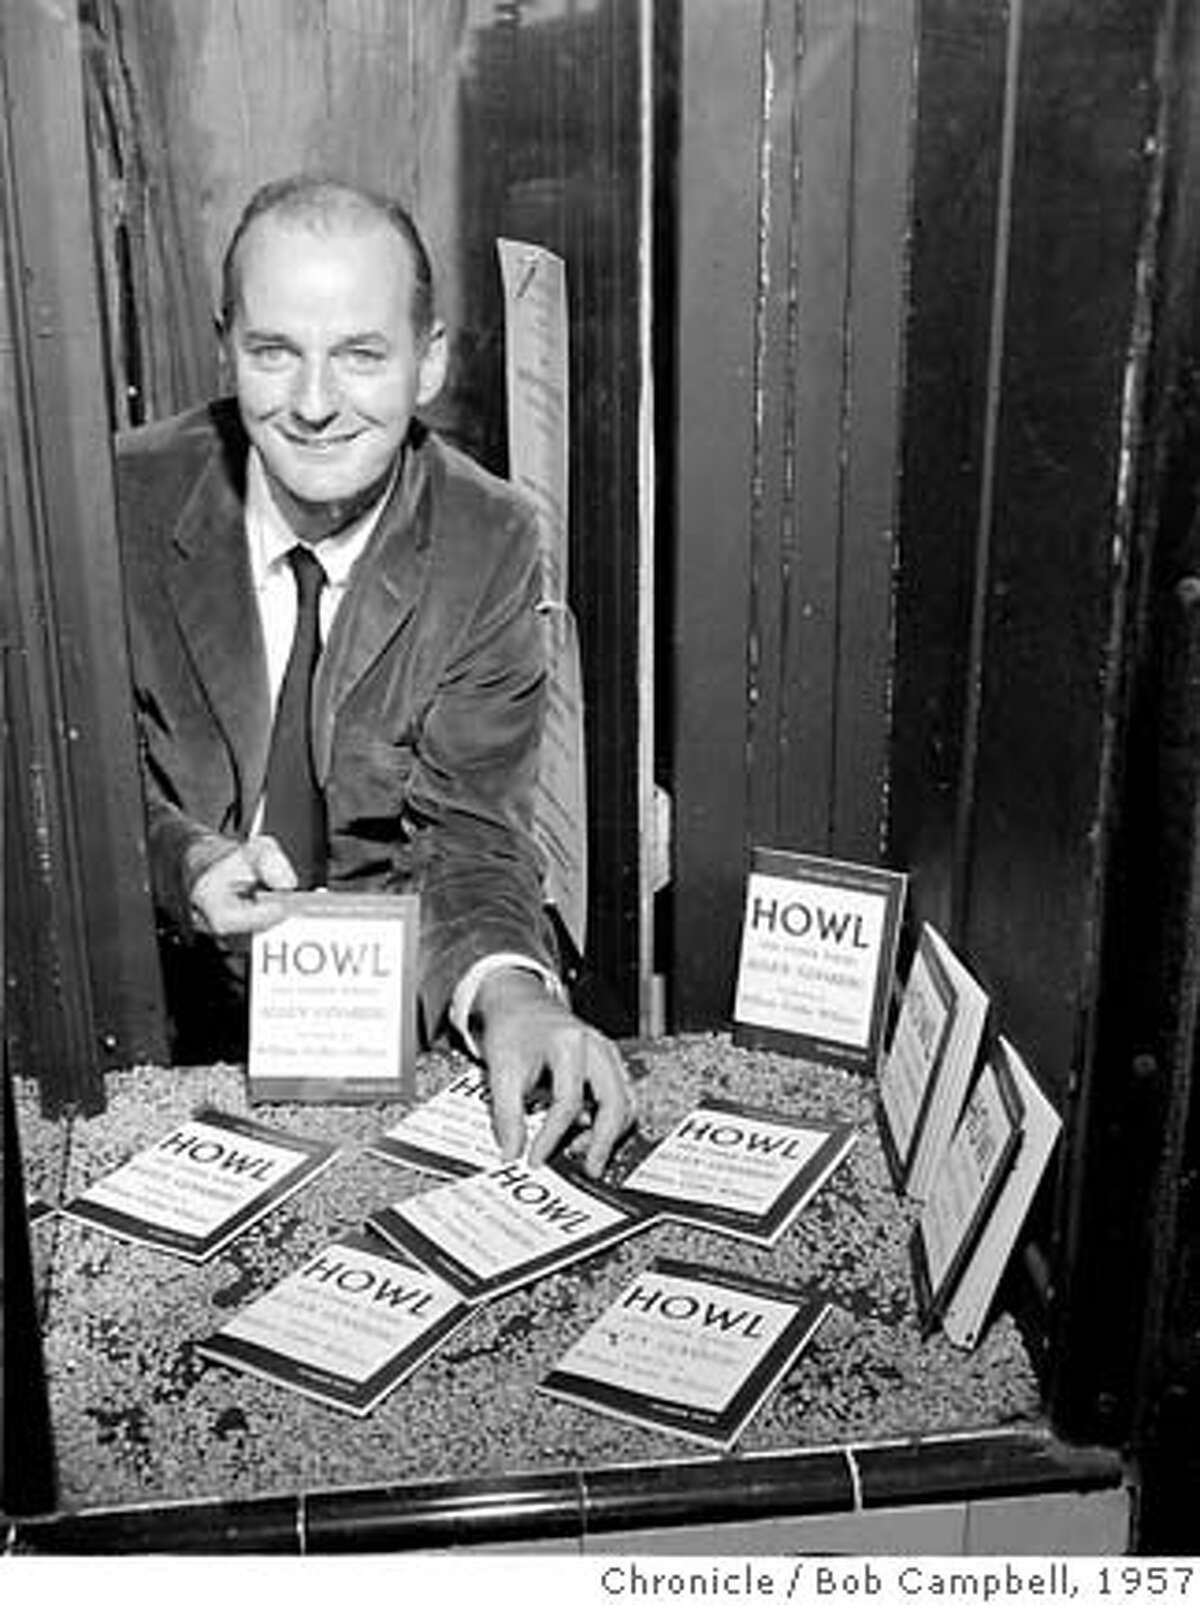 Lawrence Fehlinghetti, during the Howl Magazine case. Photo by Bob Campbell